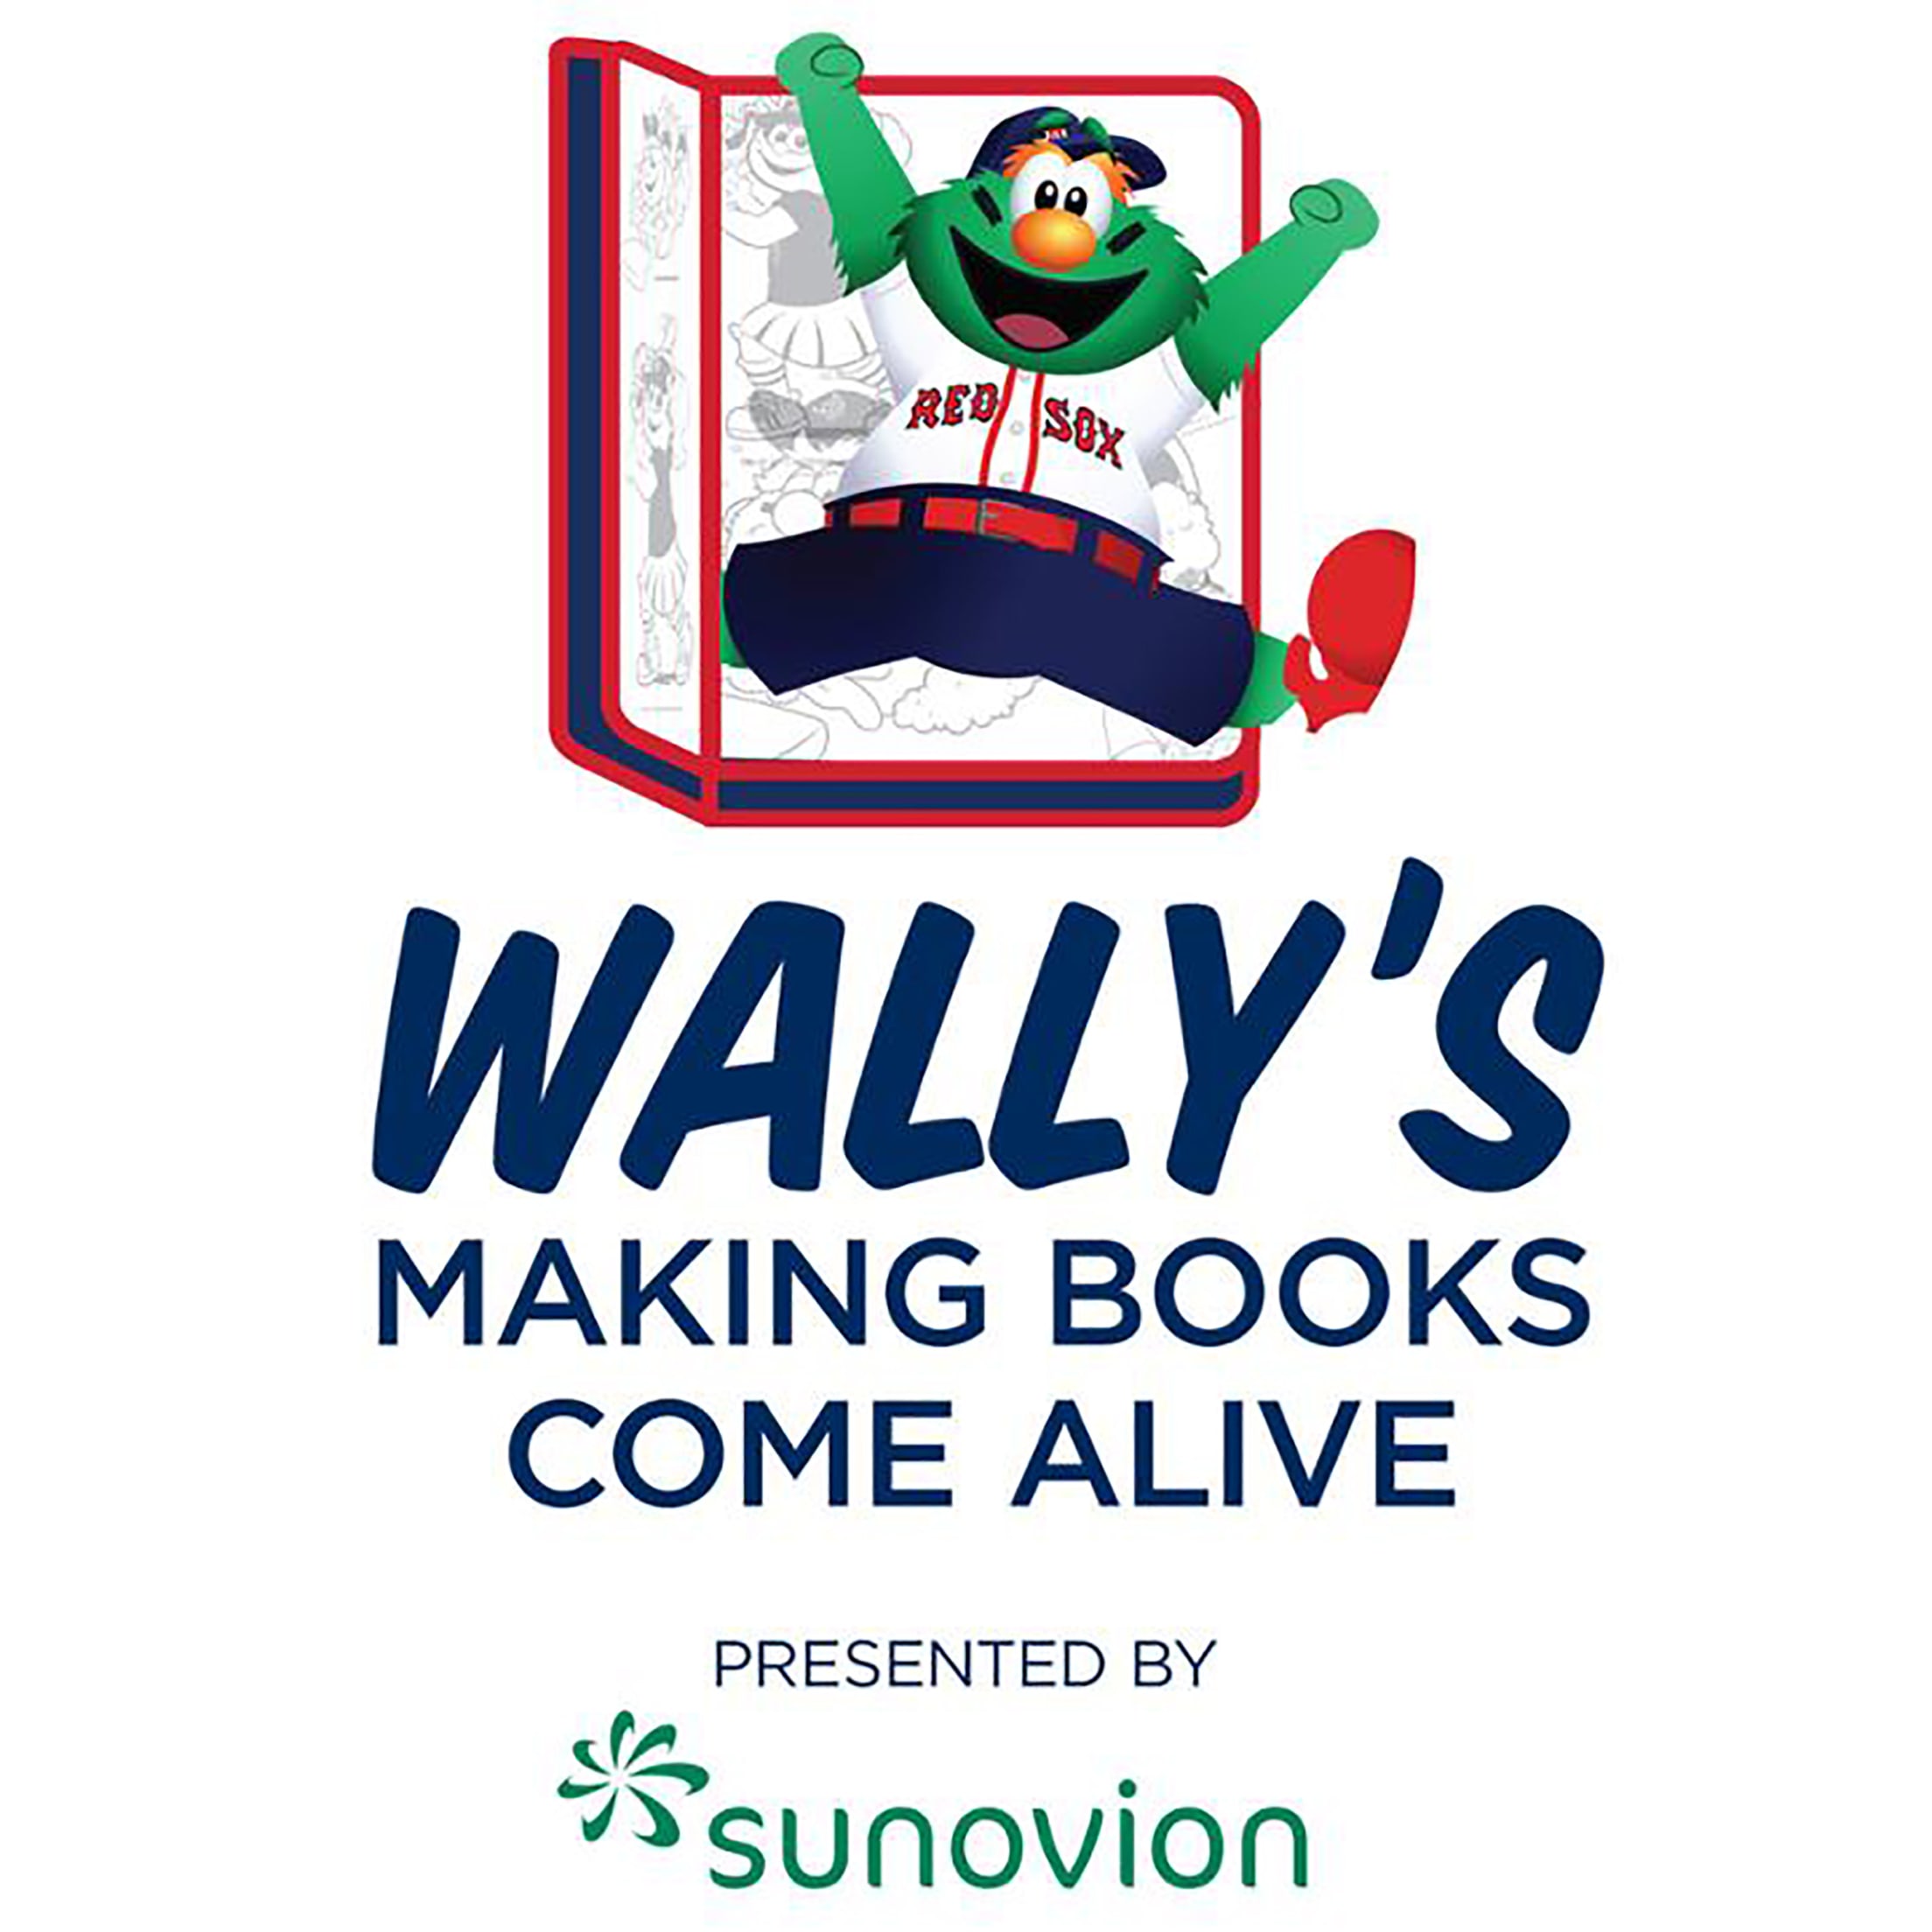 Boston Red Sox Wally the Green Monster and His World Tour Children's  Hardcover Book